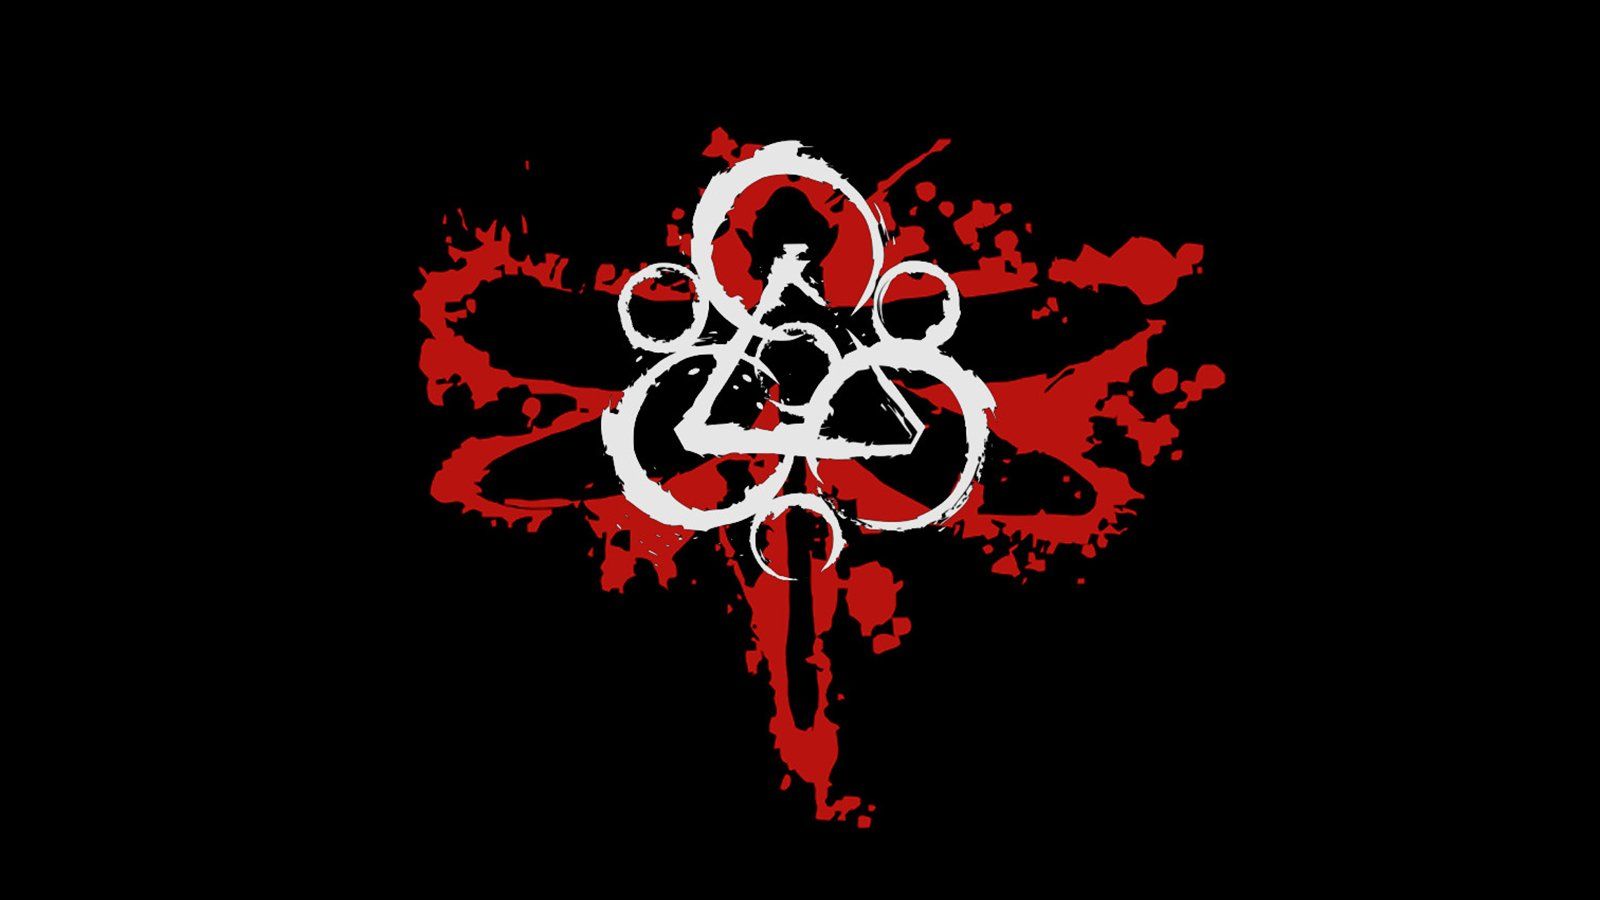 Coheed and cambria wallpapers  Coheed and cambria Planets wallpaper  Wallpaper